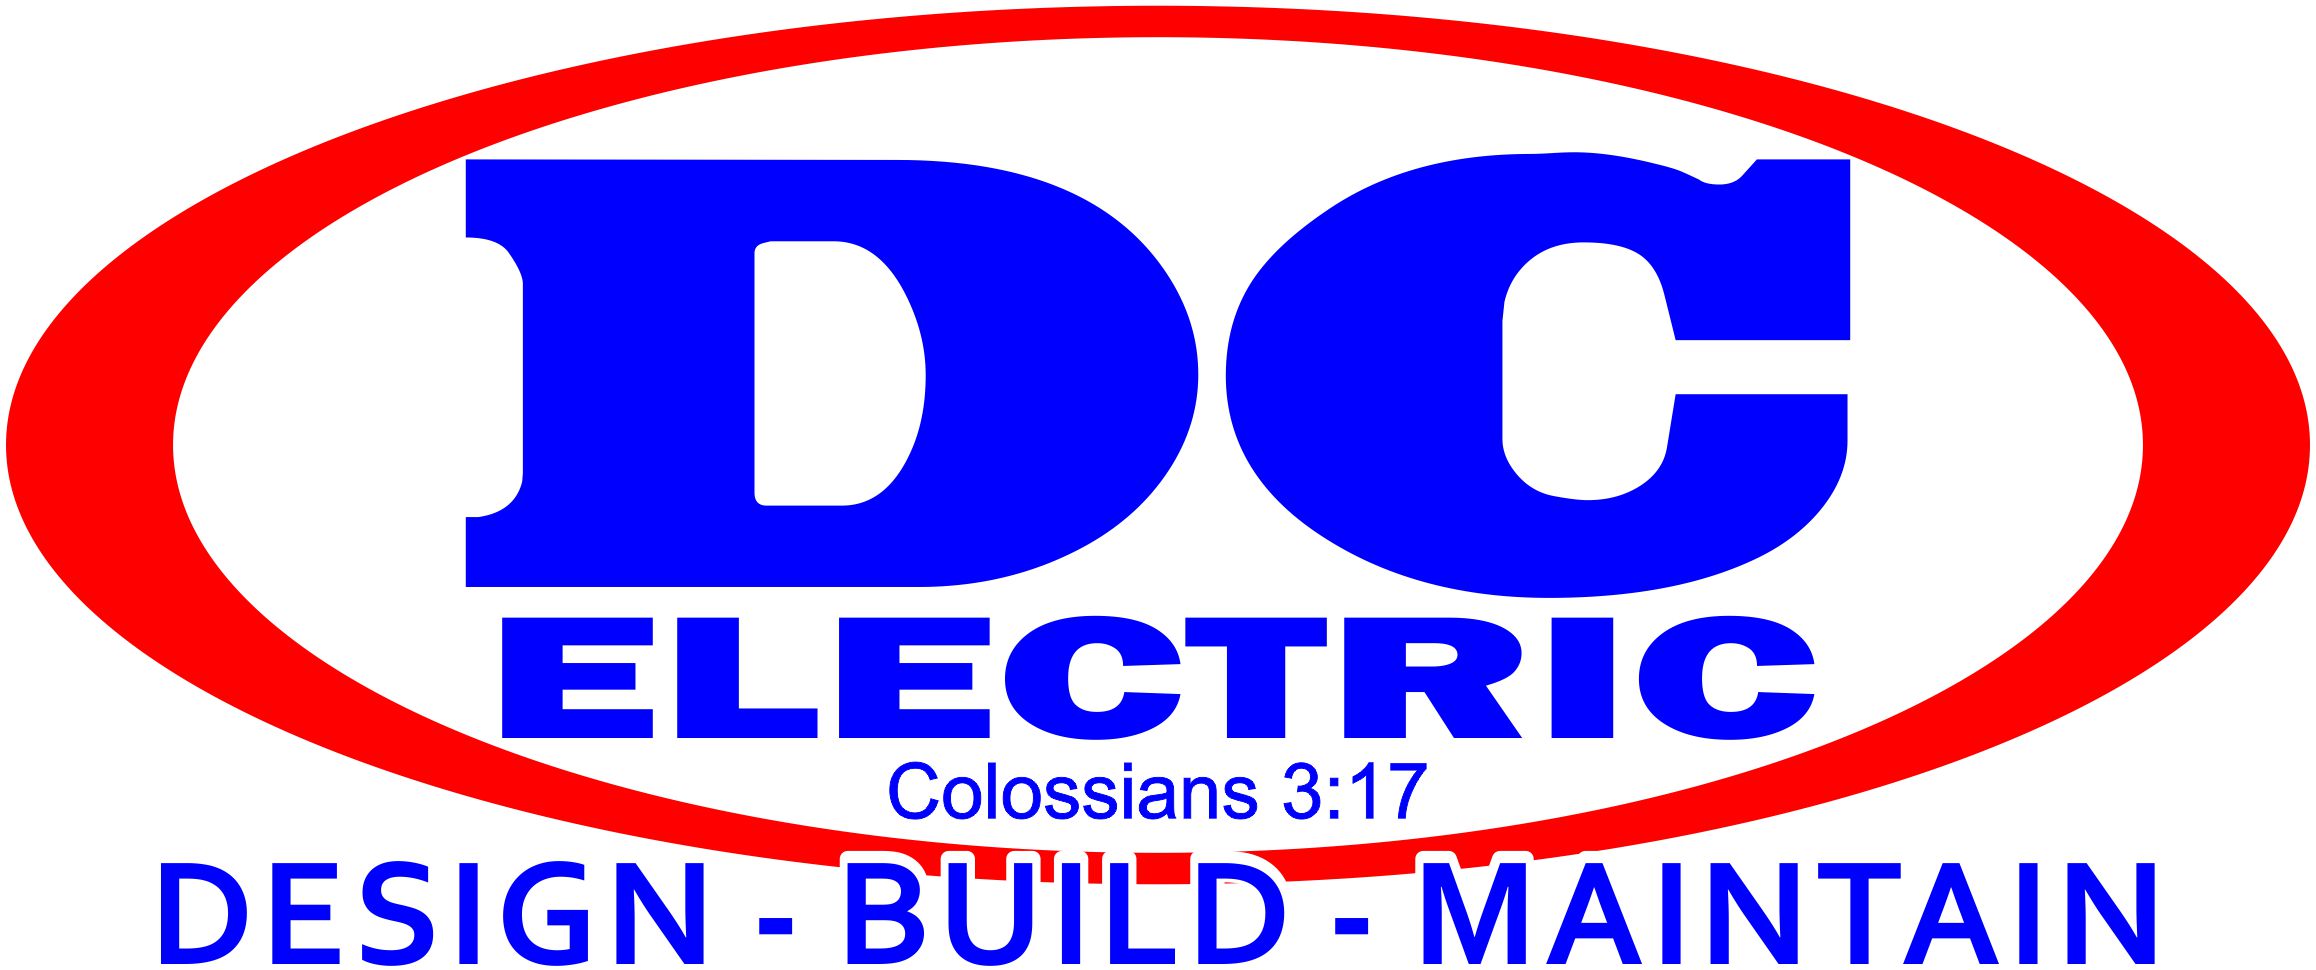 Electrical and Technology Contractor